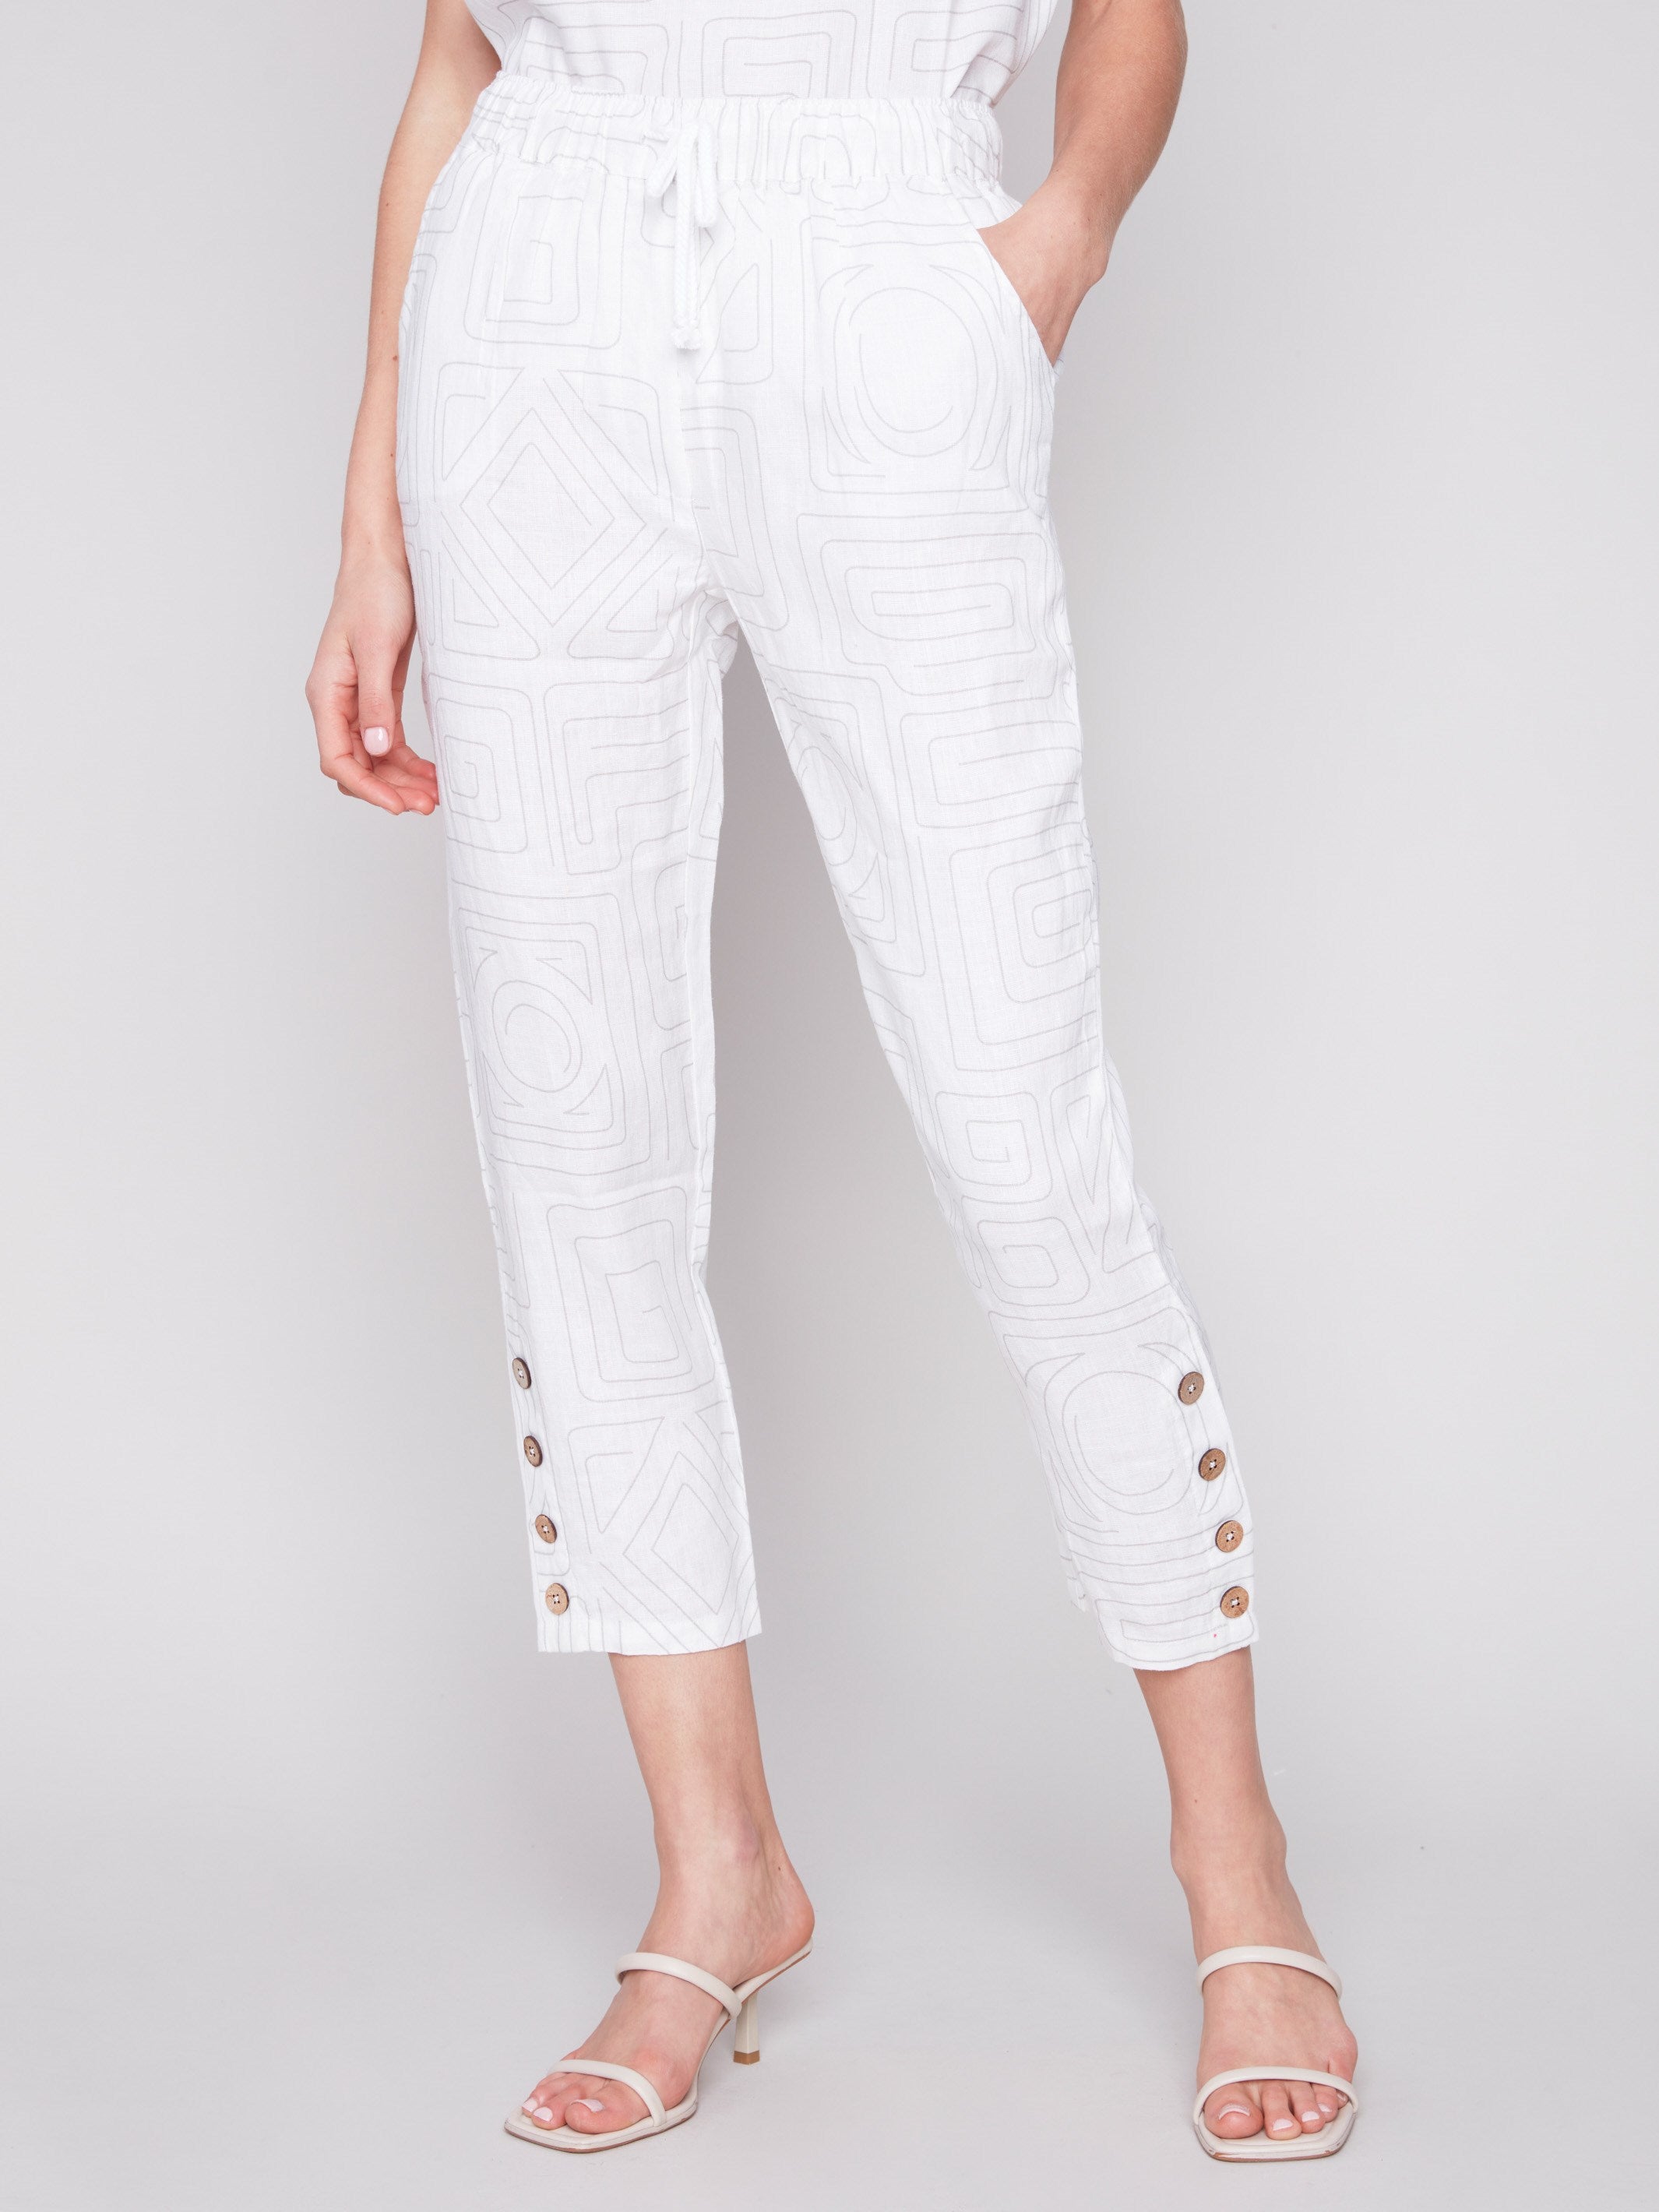 Charlie B Linen Jogger Pants with Button Detail - Light Grey - Image 2